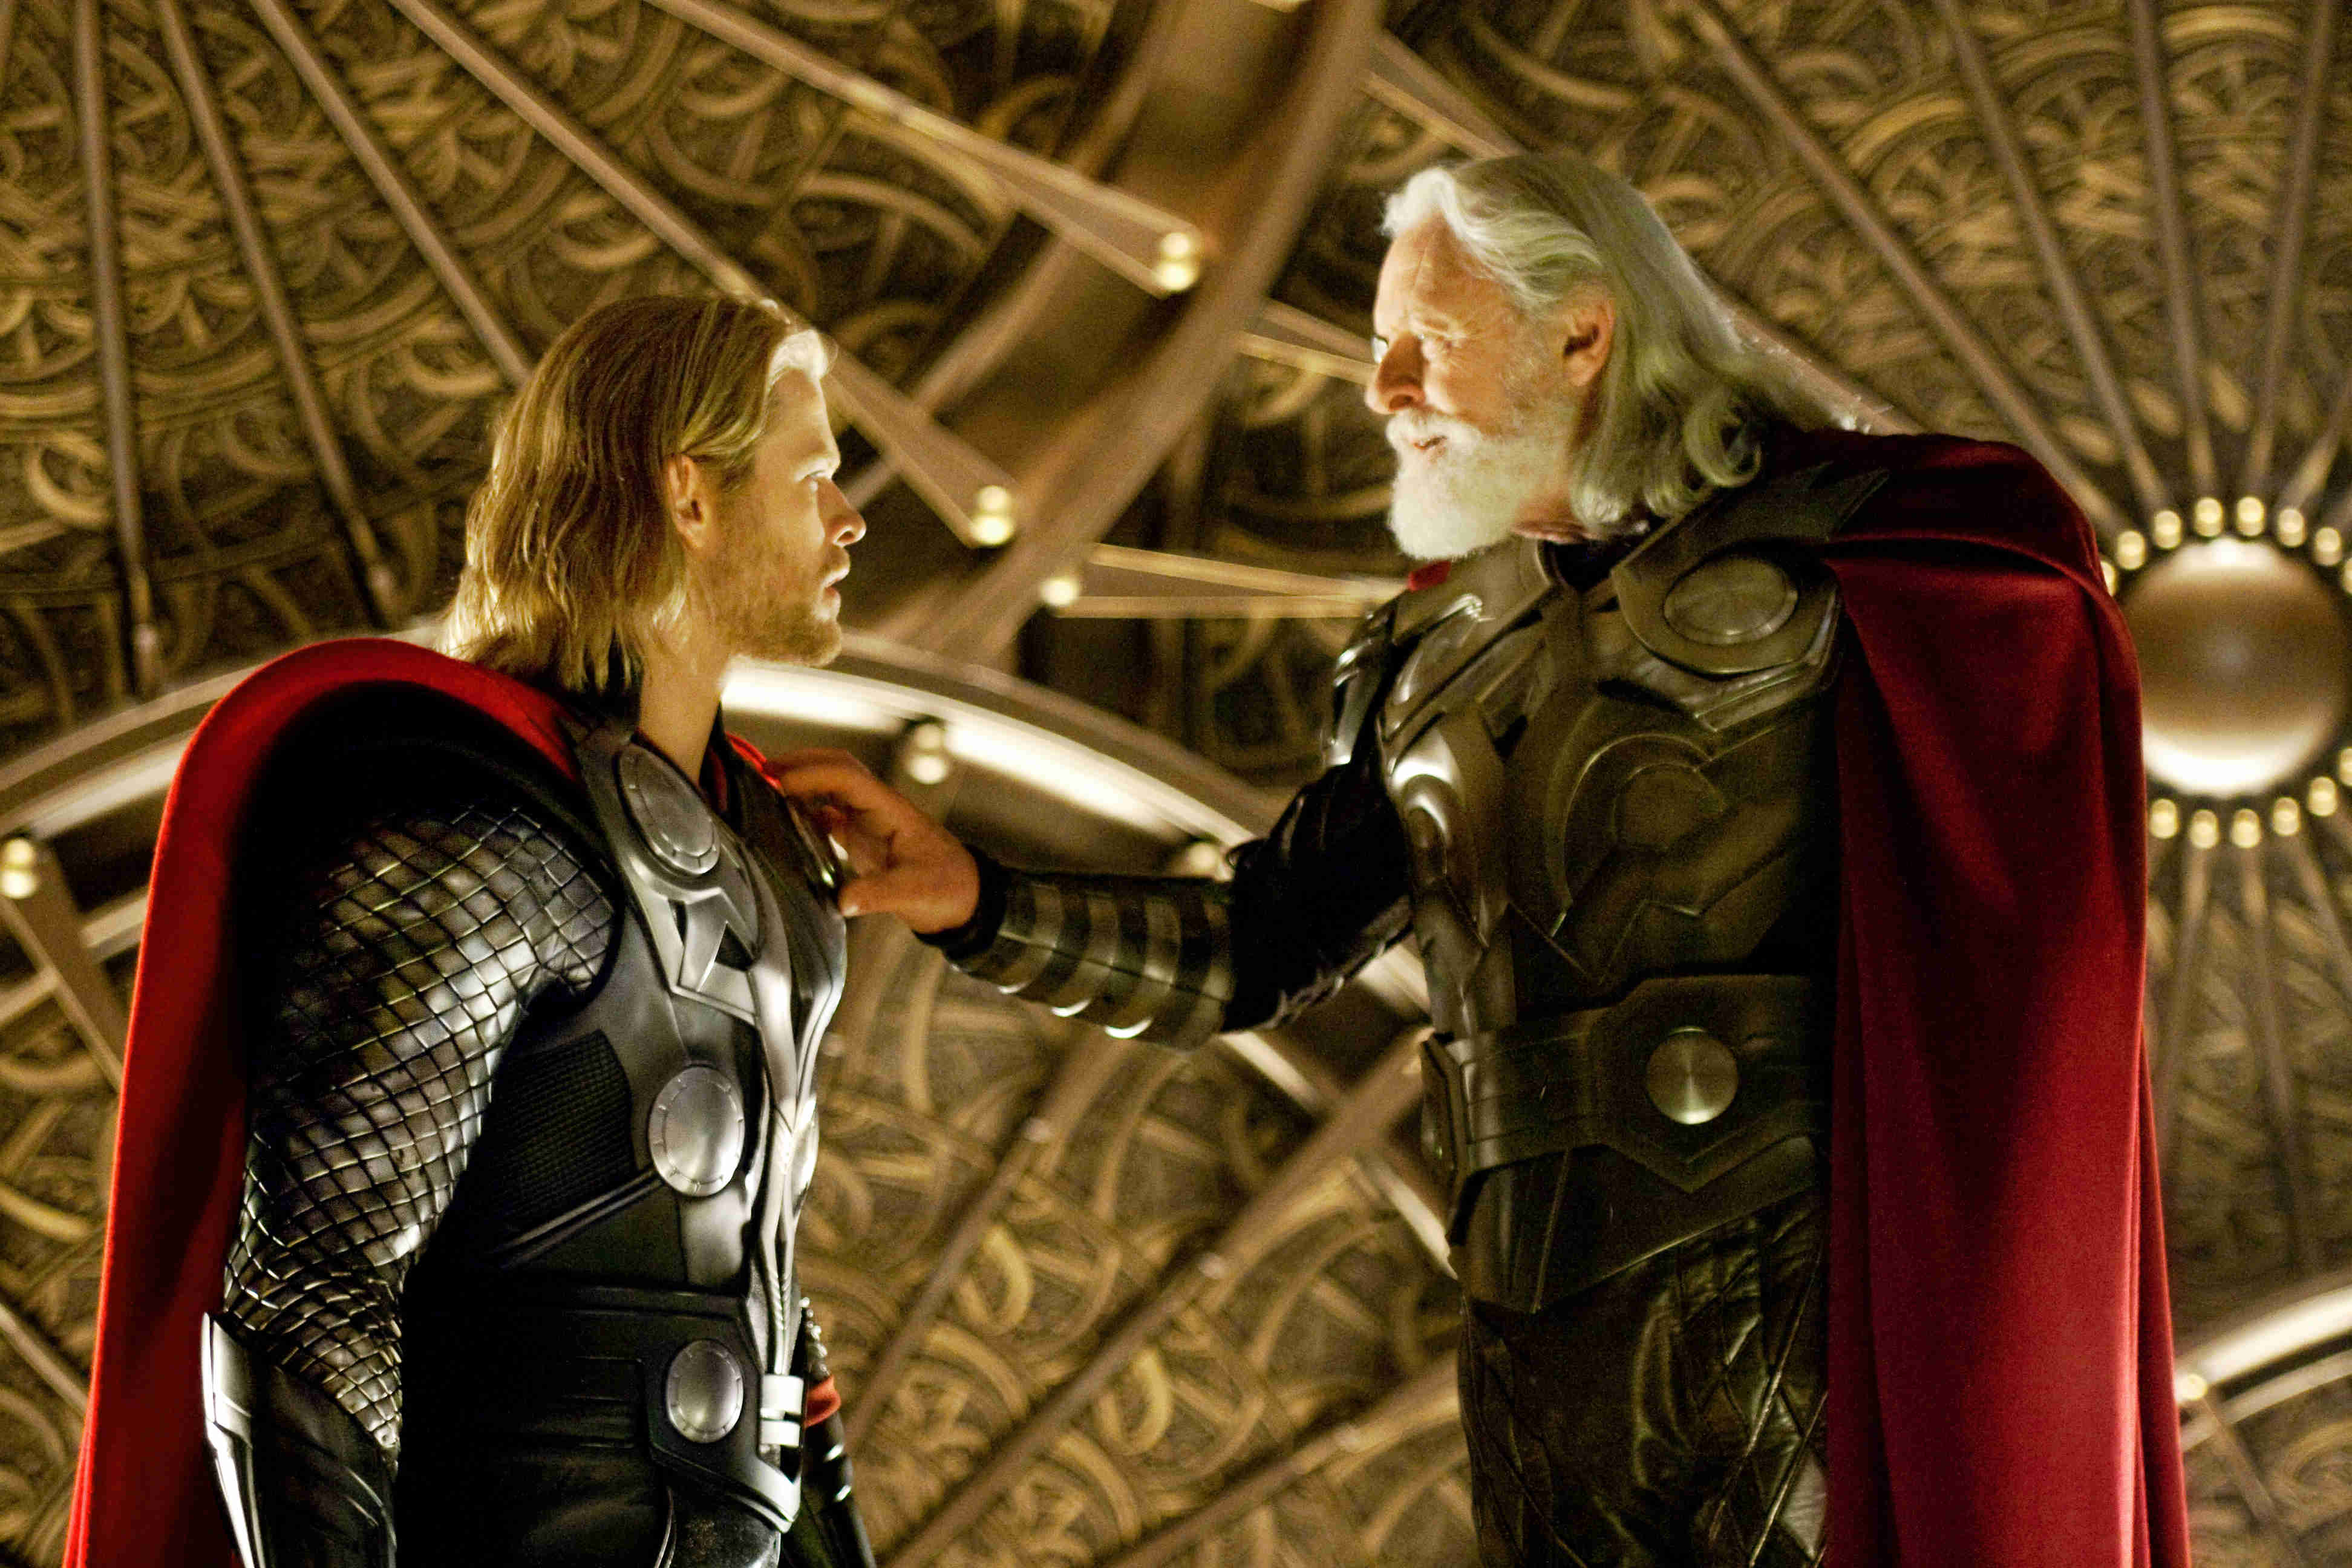 Chris Hemsworth stars as Thor and Anthony Hopkins stars as Odin in Paramount Pictures' Thor (2011)